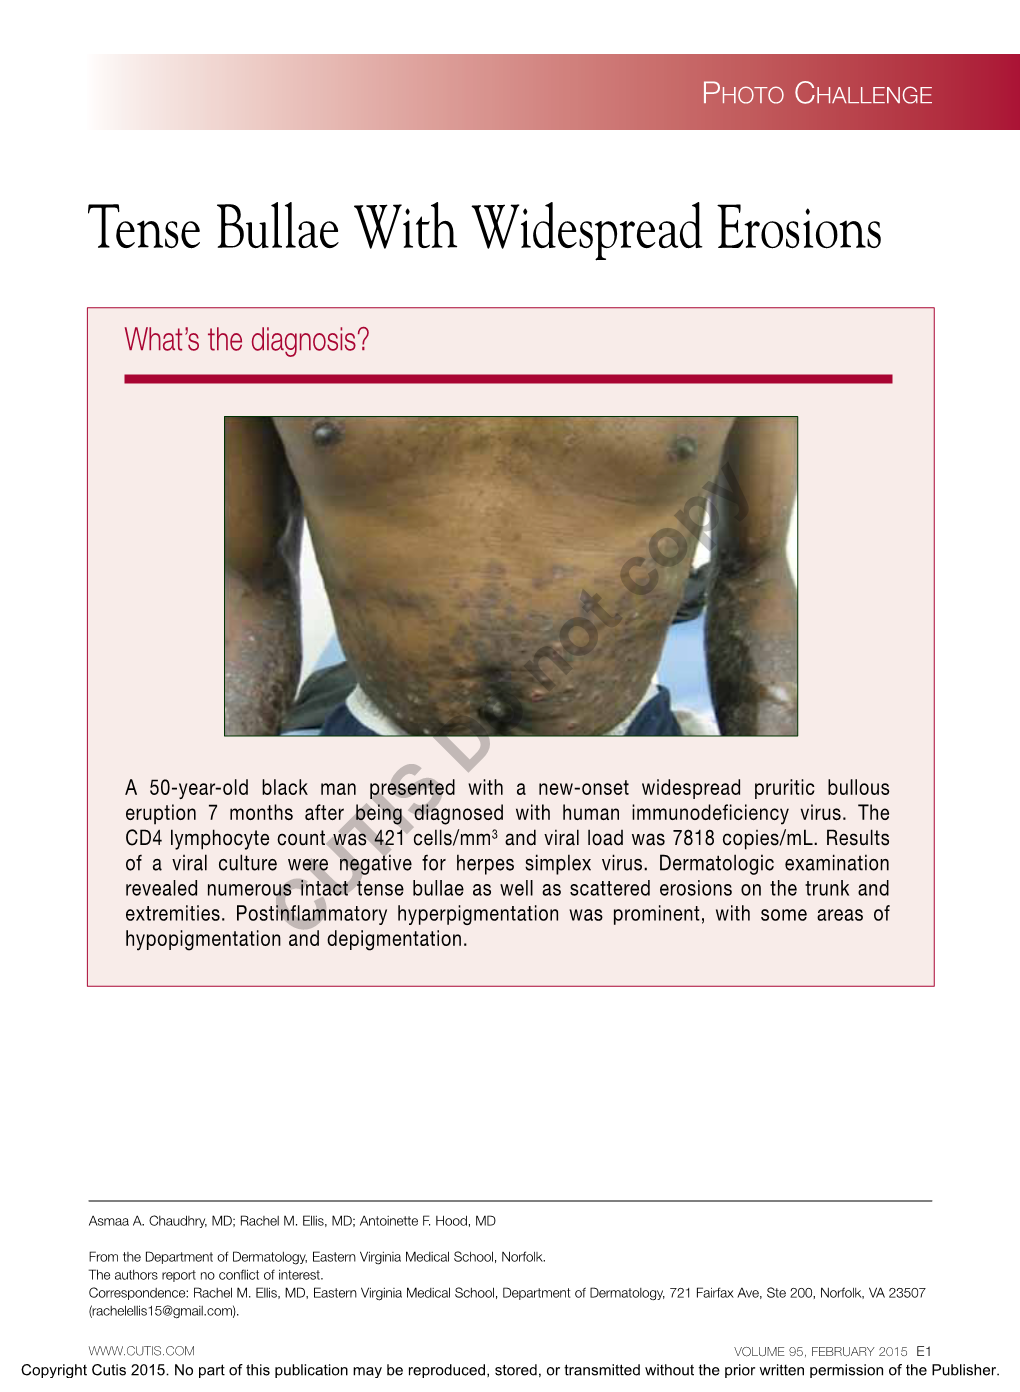 Tense Bullae with Widespread Erosions